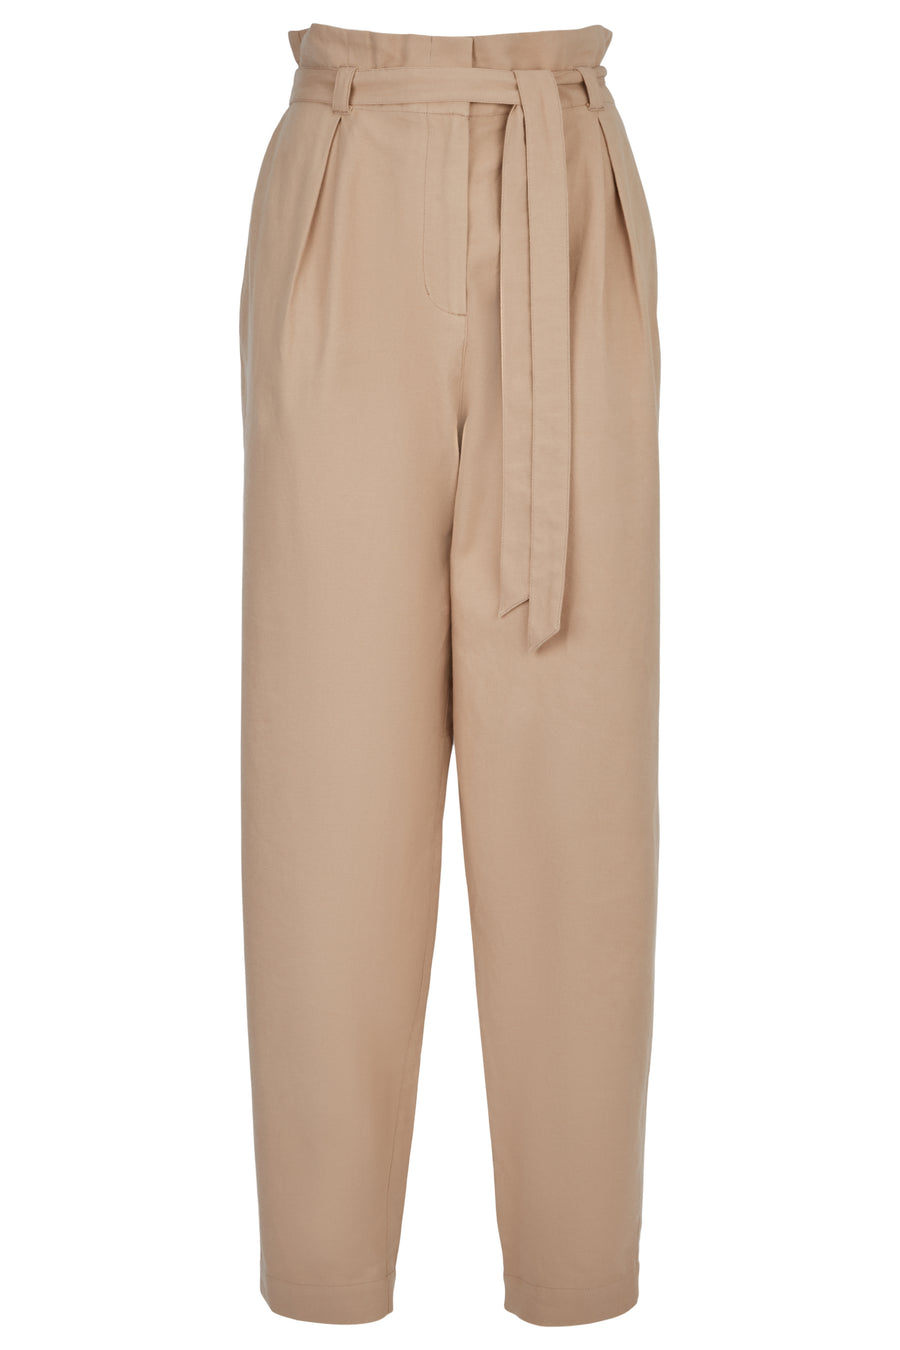 People Tree Fair Trade, Ethical & Sustainable Briar Trousers in Sand 100% Organic Cotton